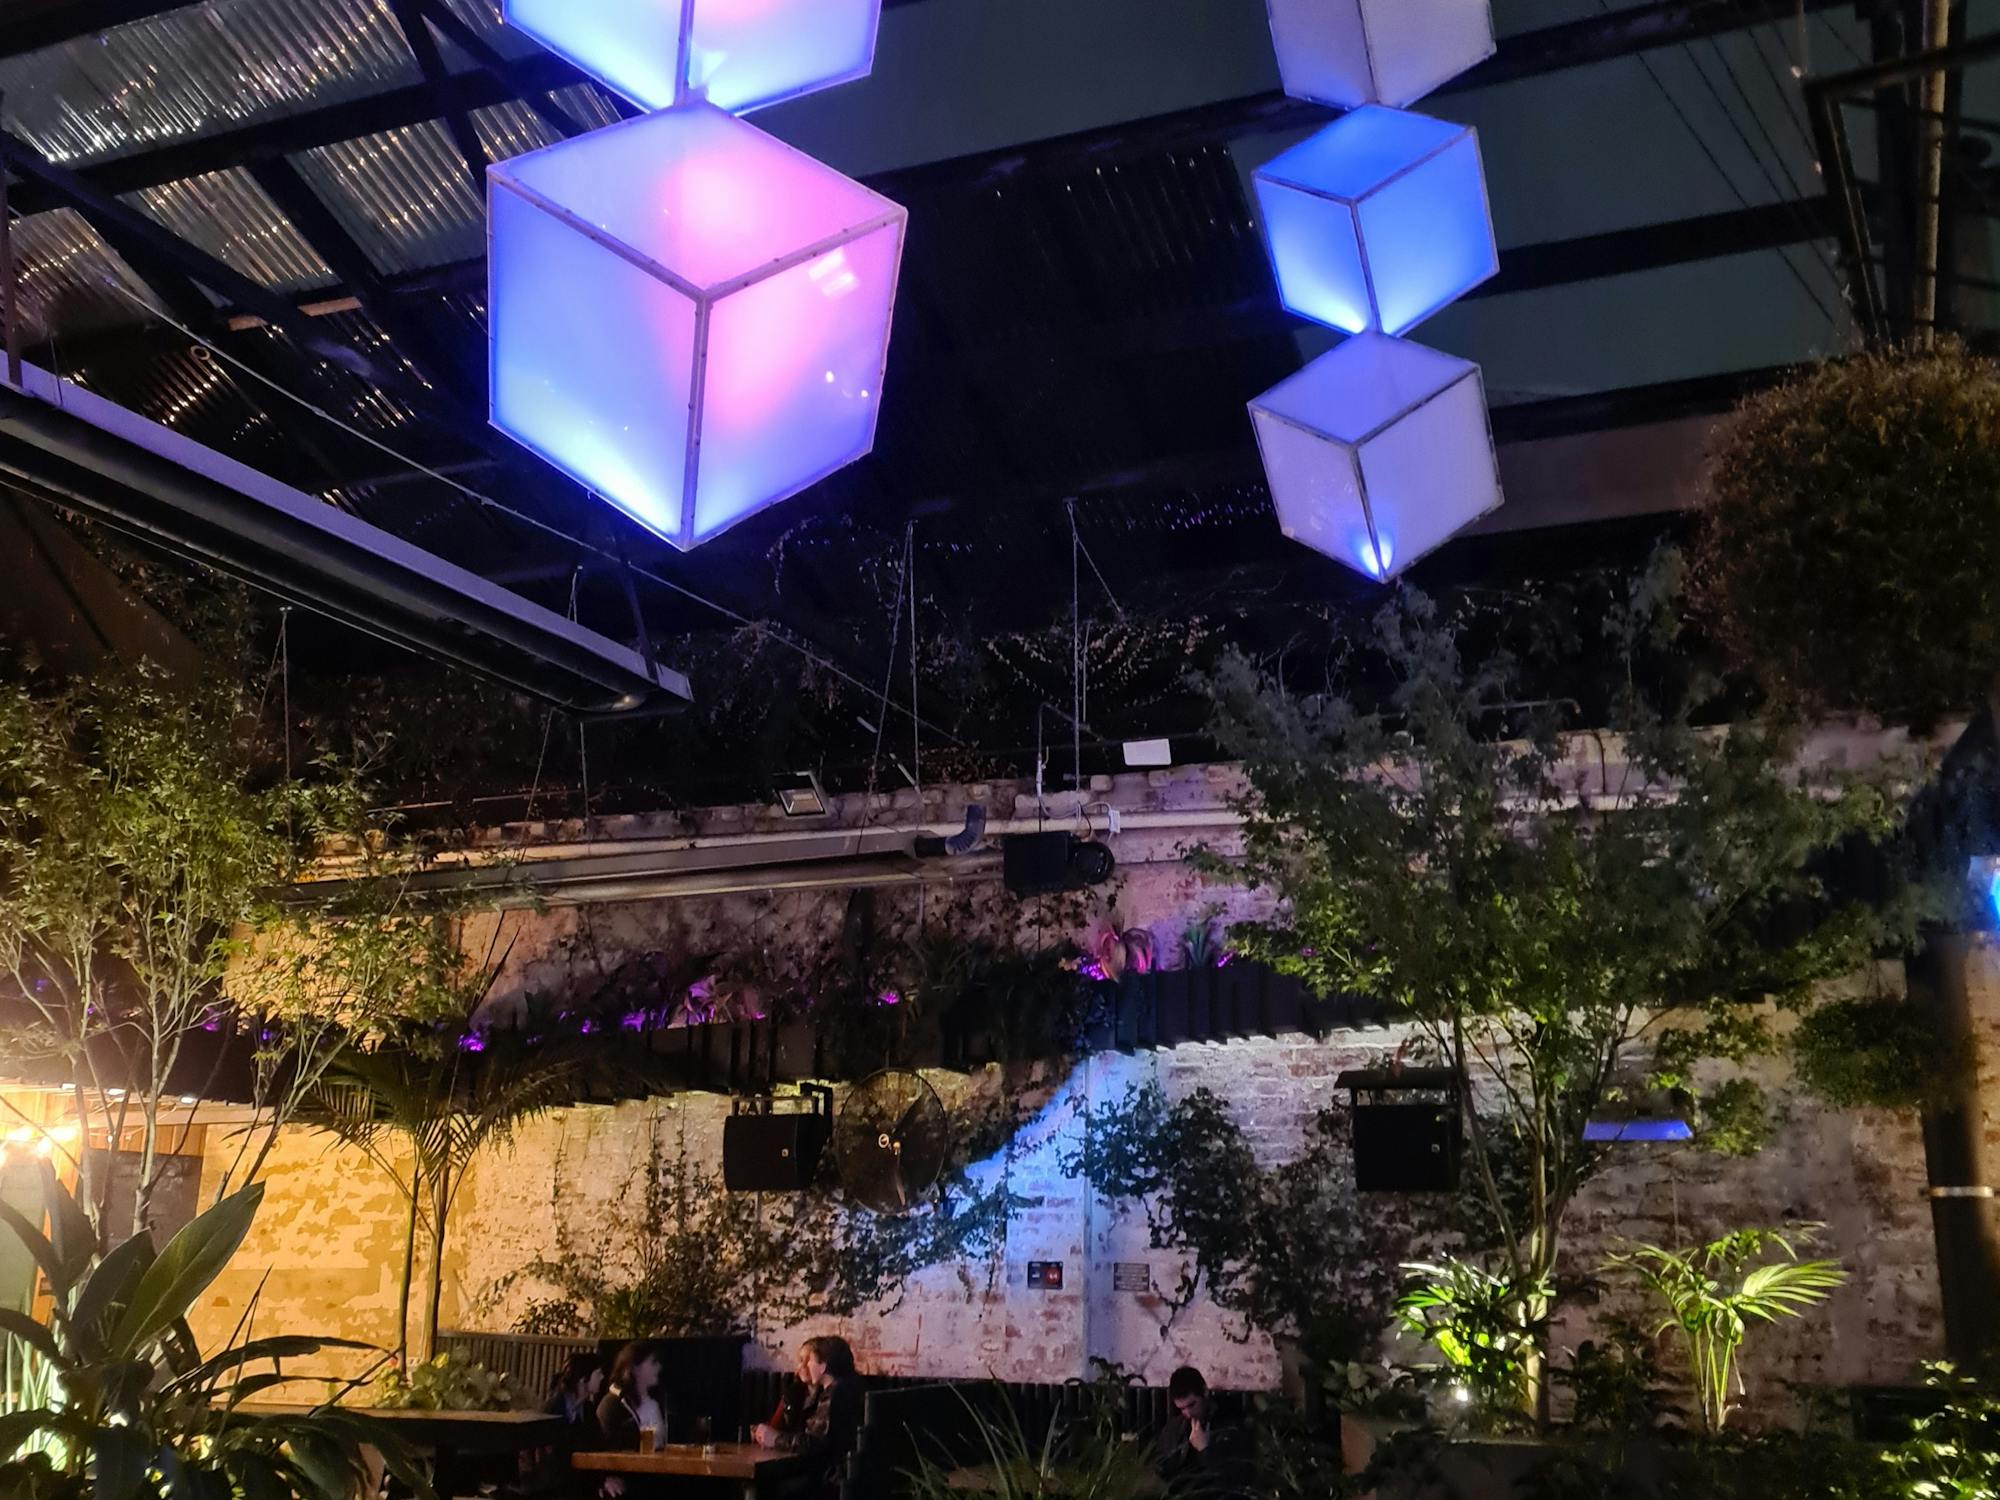 Hanging cube architectural lights coloured purple suspended over seating with many plants.